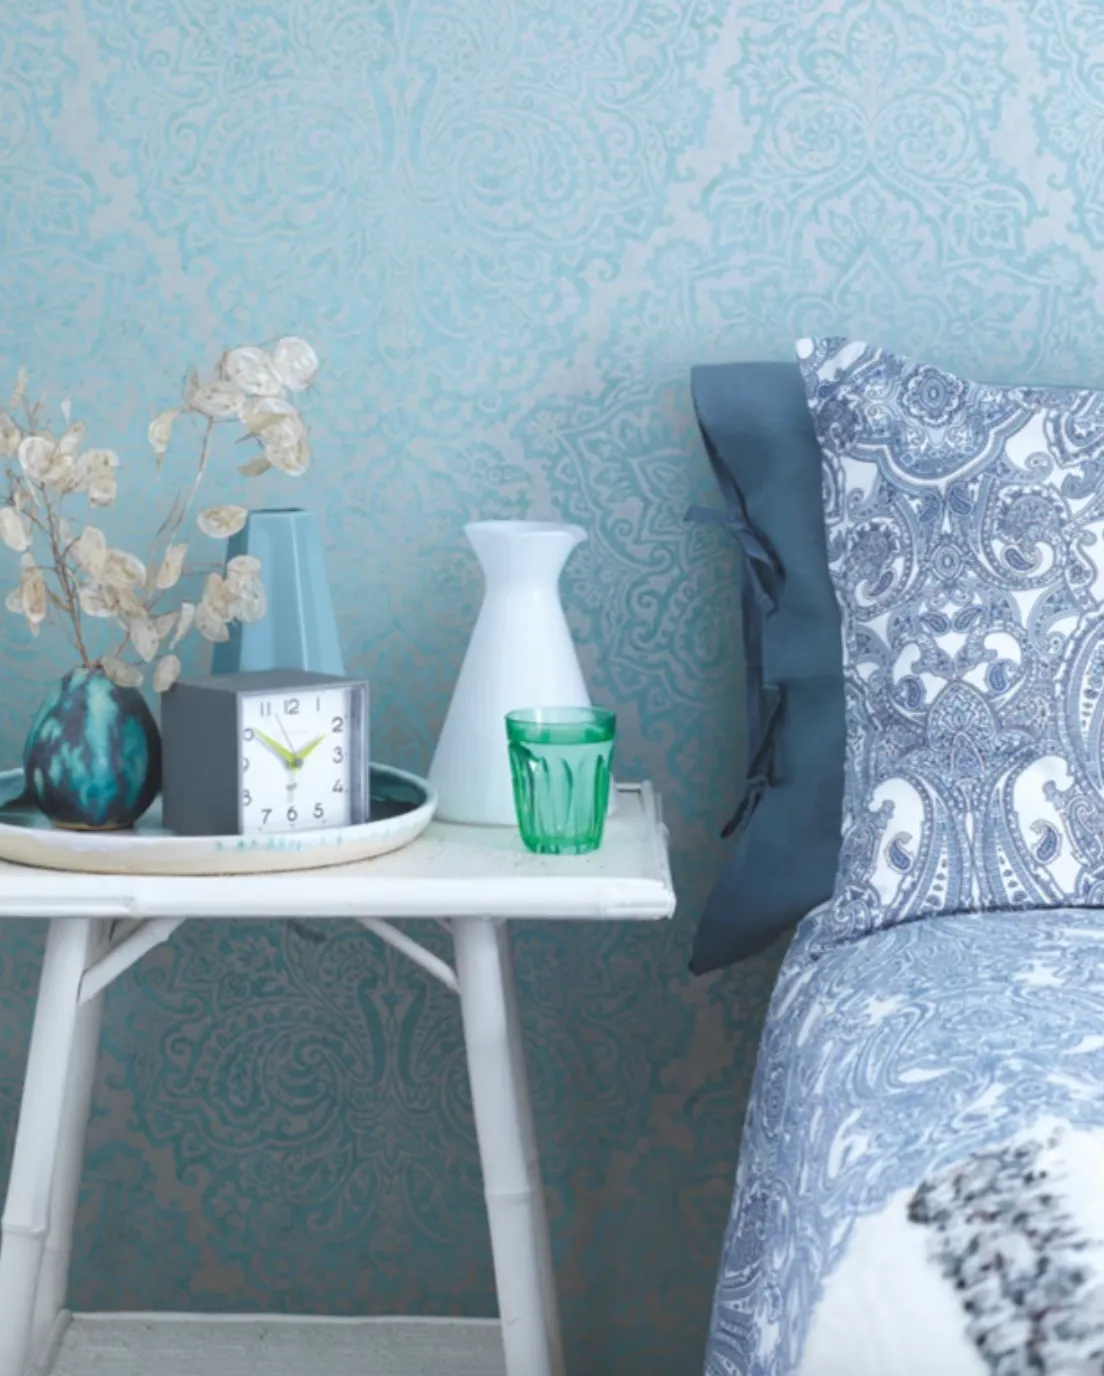 'As most of our collected bits and bobs are blue or green, the soft teal colourway was an easy choice,' says Sinead. See her home makeover.